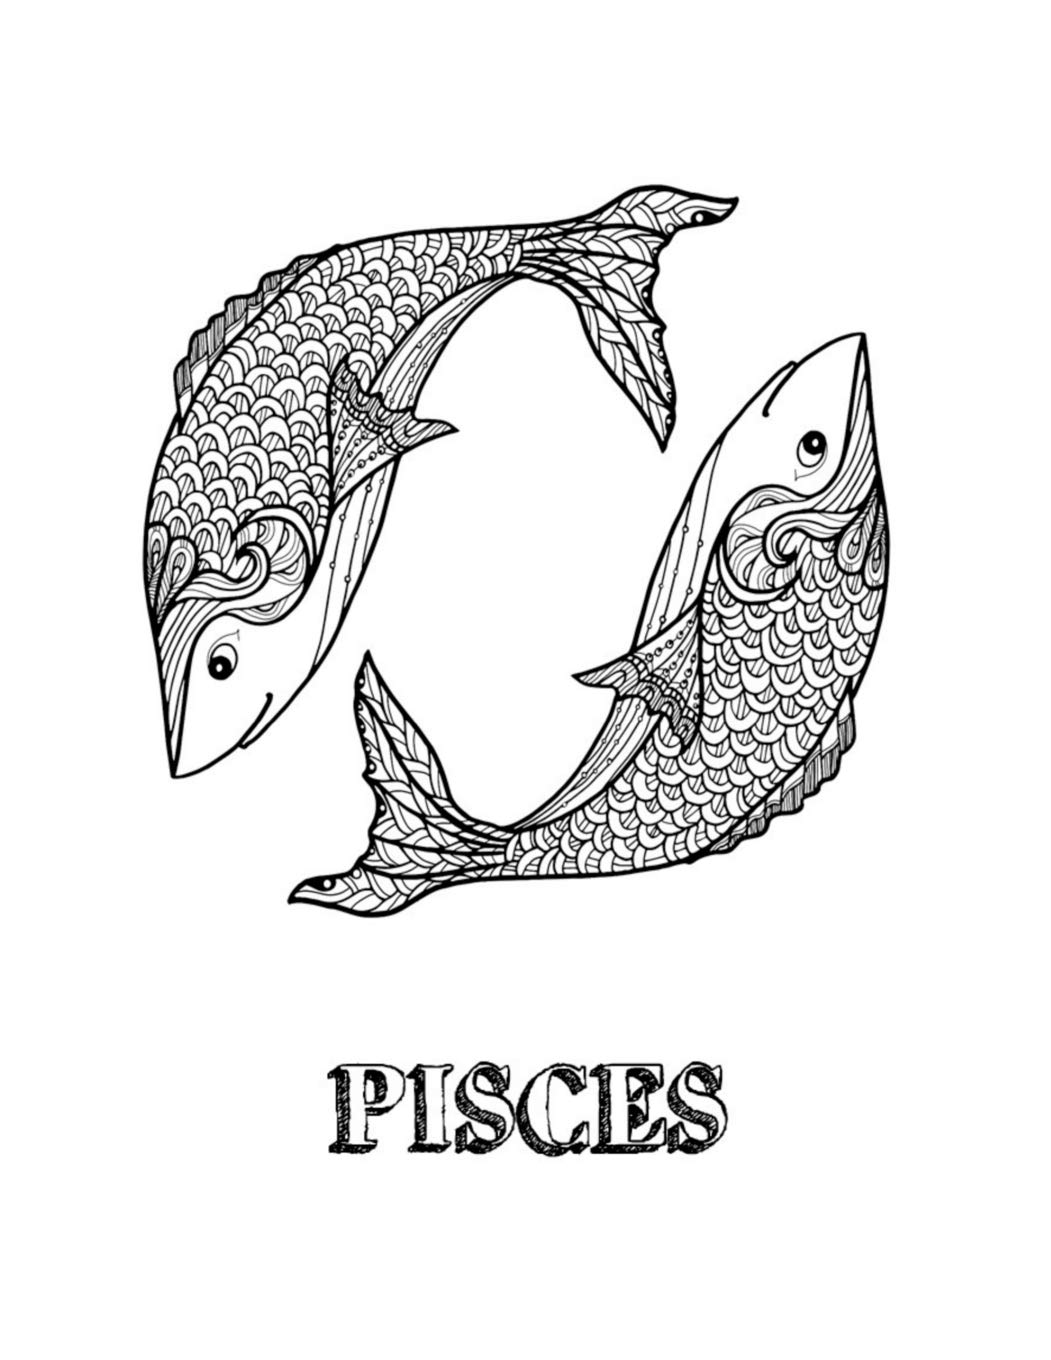 Pisces: Coloring Book with Three Different Styles of All Twelve Signs of  the Zodiac. 36 Individual Coloring Pages. 8.5